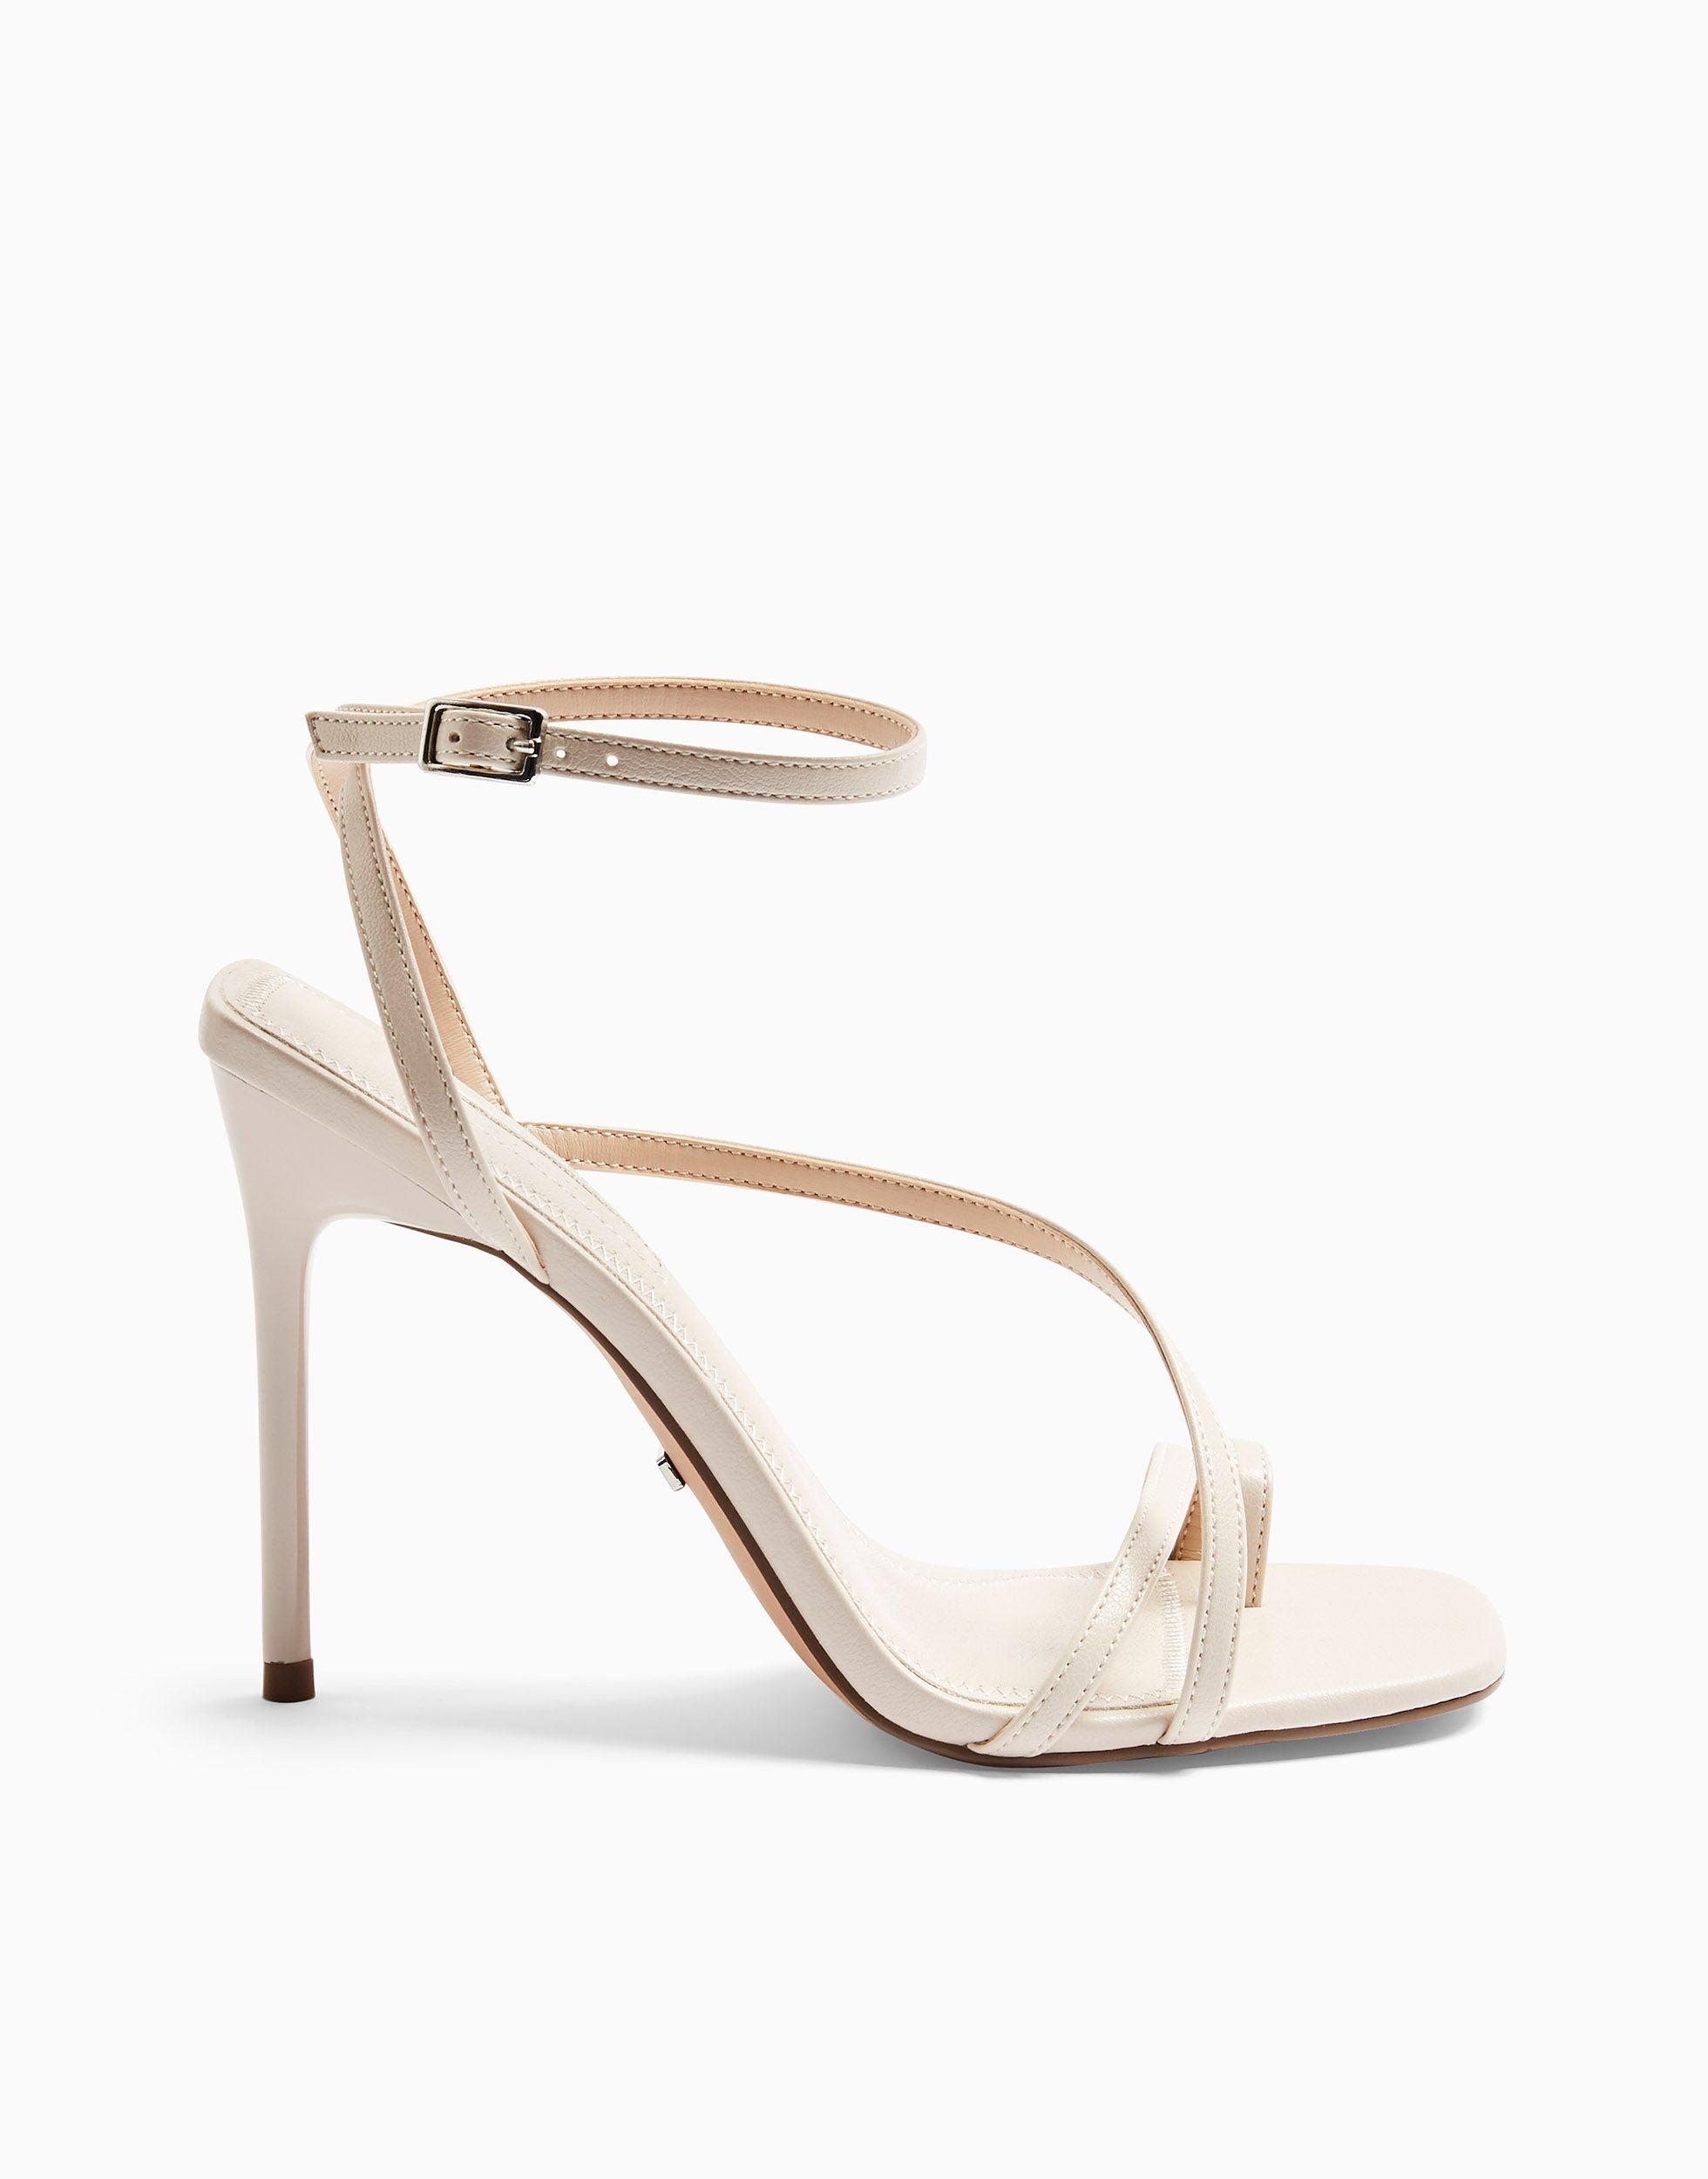 Association Established theory hostility TOPSHOP Strappy Heeled Shoes in White (Natural) | Lyst